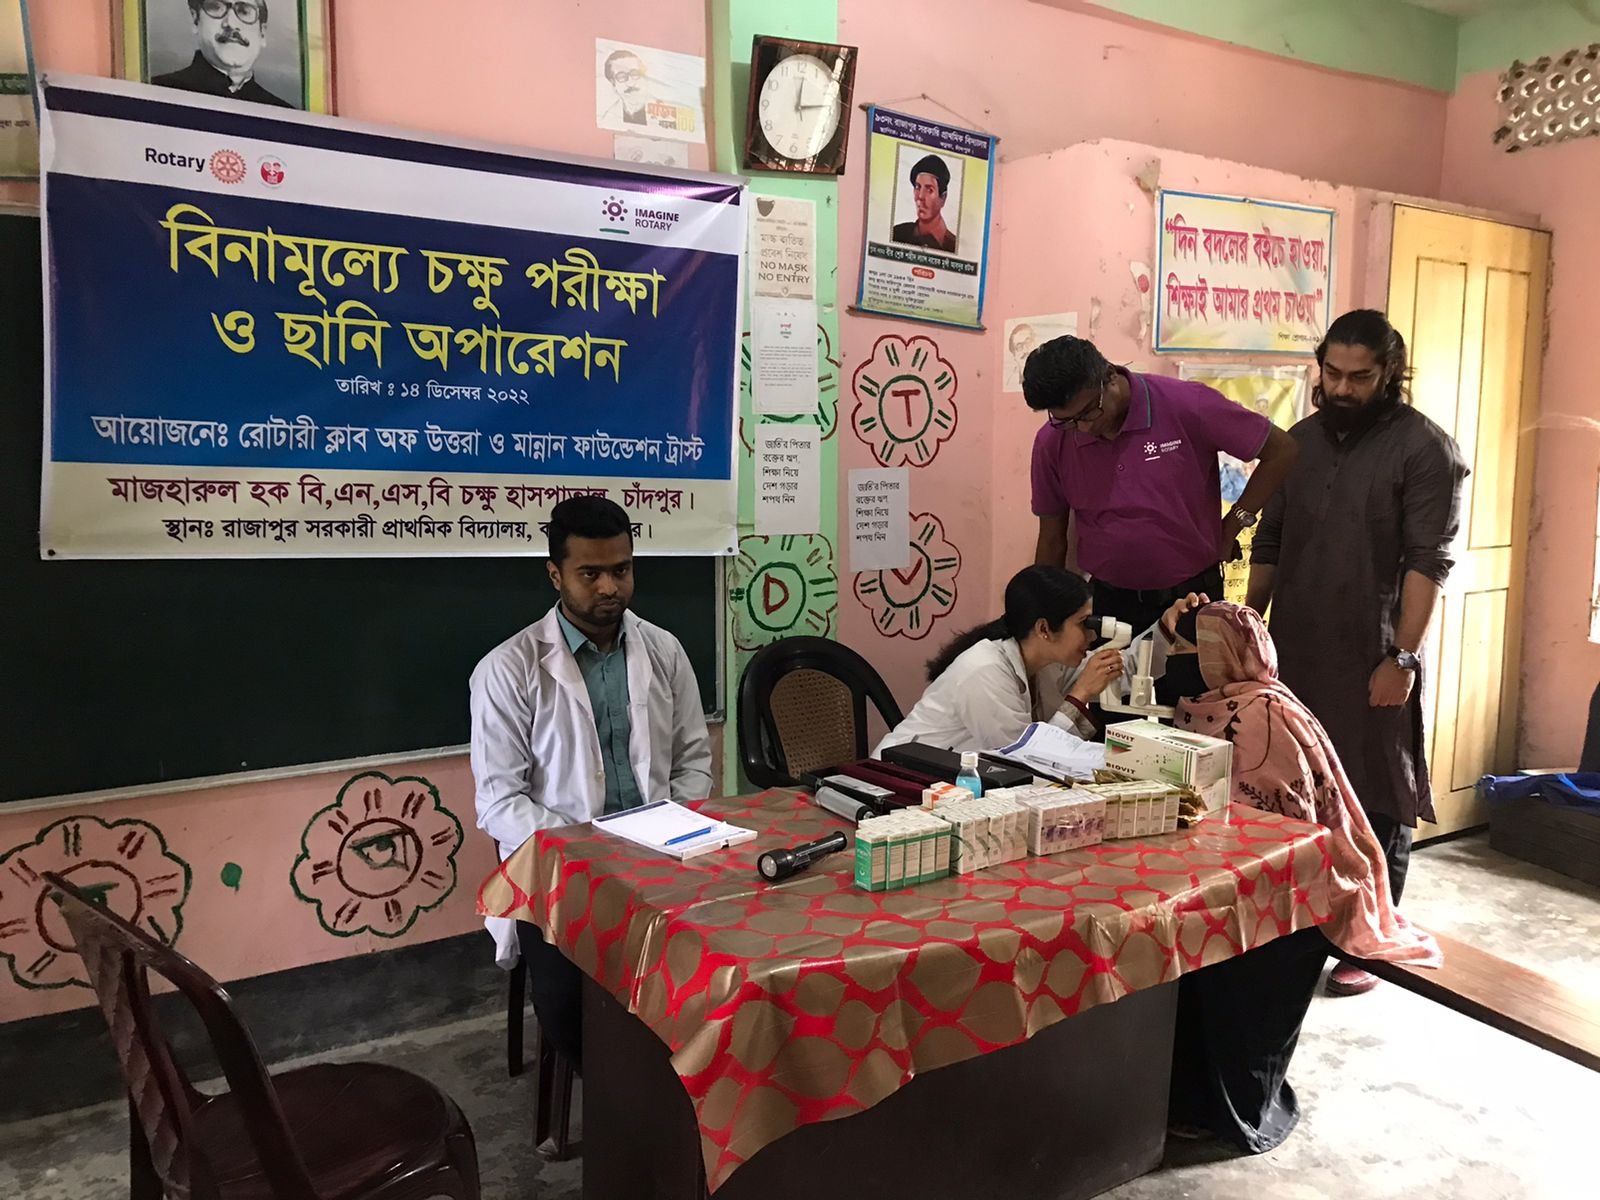   December 2022: Mannan Foundation Trust’s Free Eye Surgery   Our charity Mannan Foundation Trust (local charity "Professor Mannan Sriti Shangshod" in Bangladesh), recently hosted free Eye camps and financially supported the eye surgeries of the vill